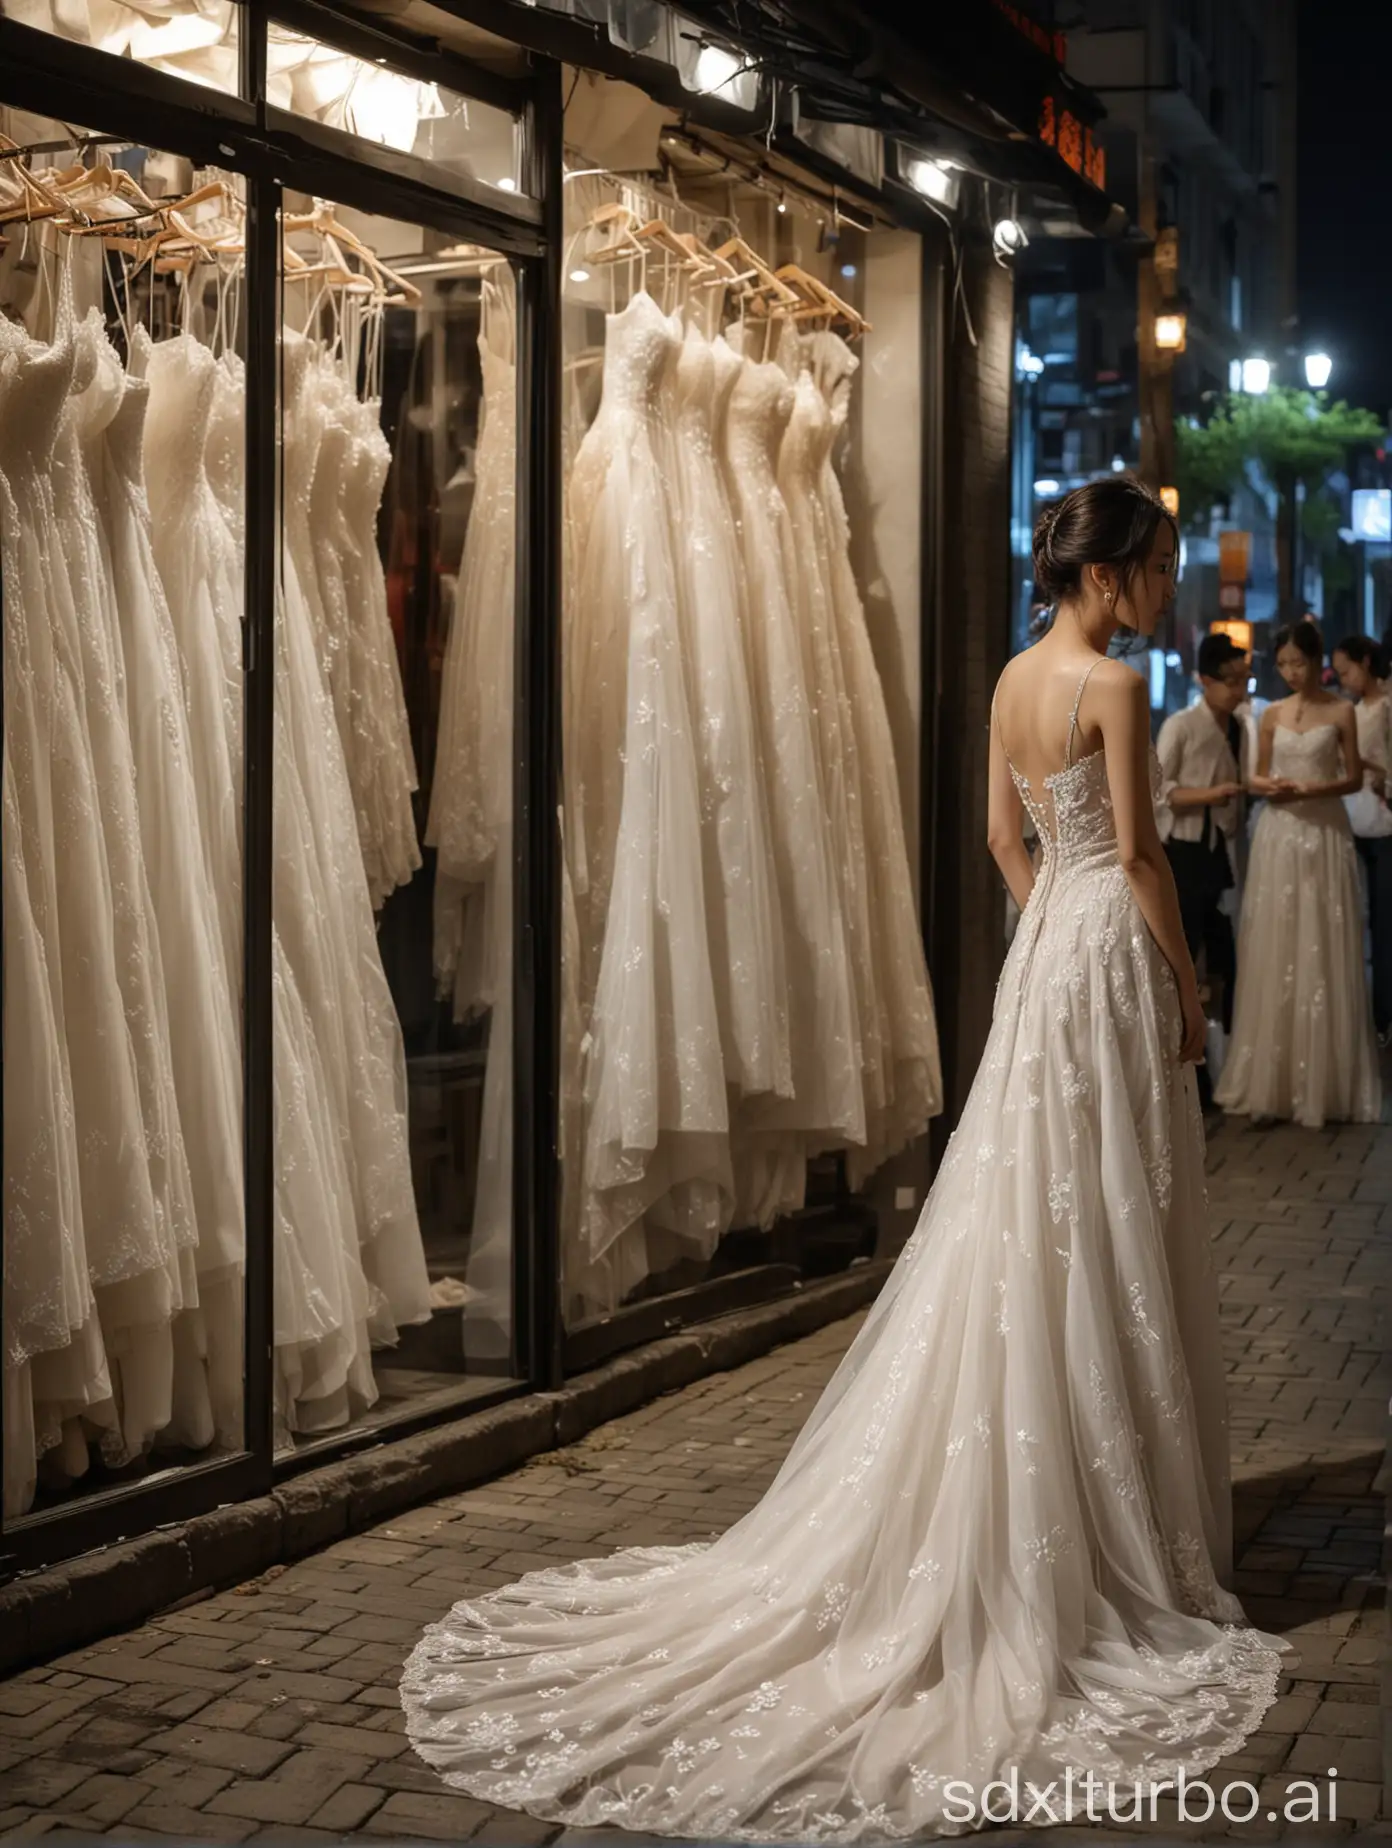 Chinese-Girl-Alone-in-Bridal-Shop-at-Night